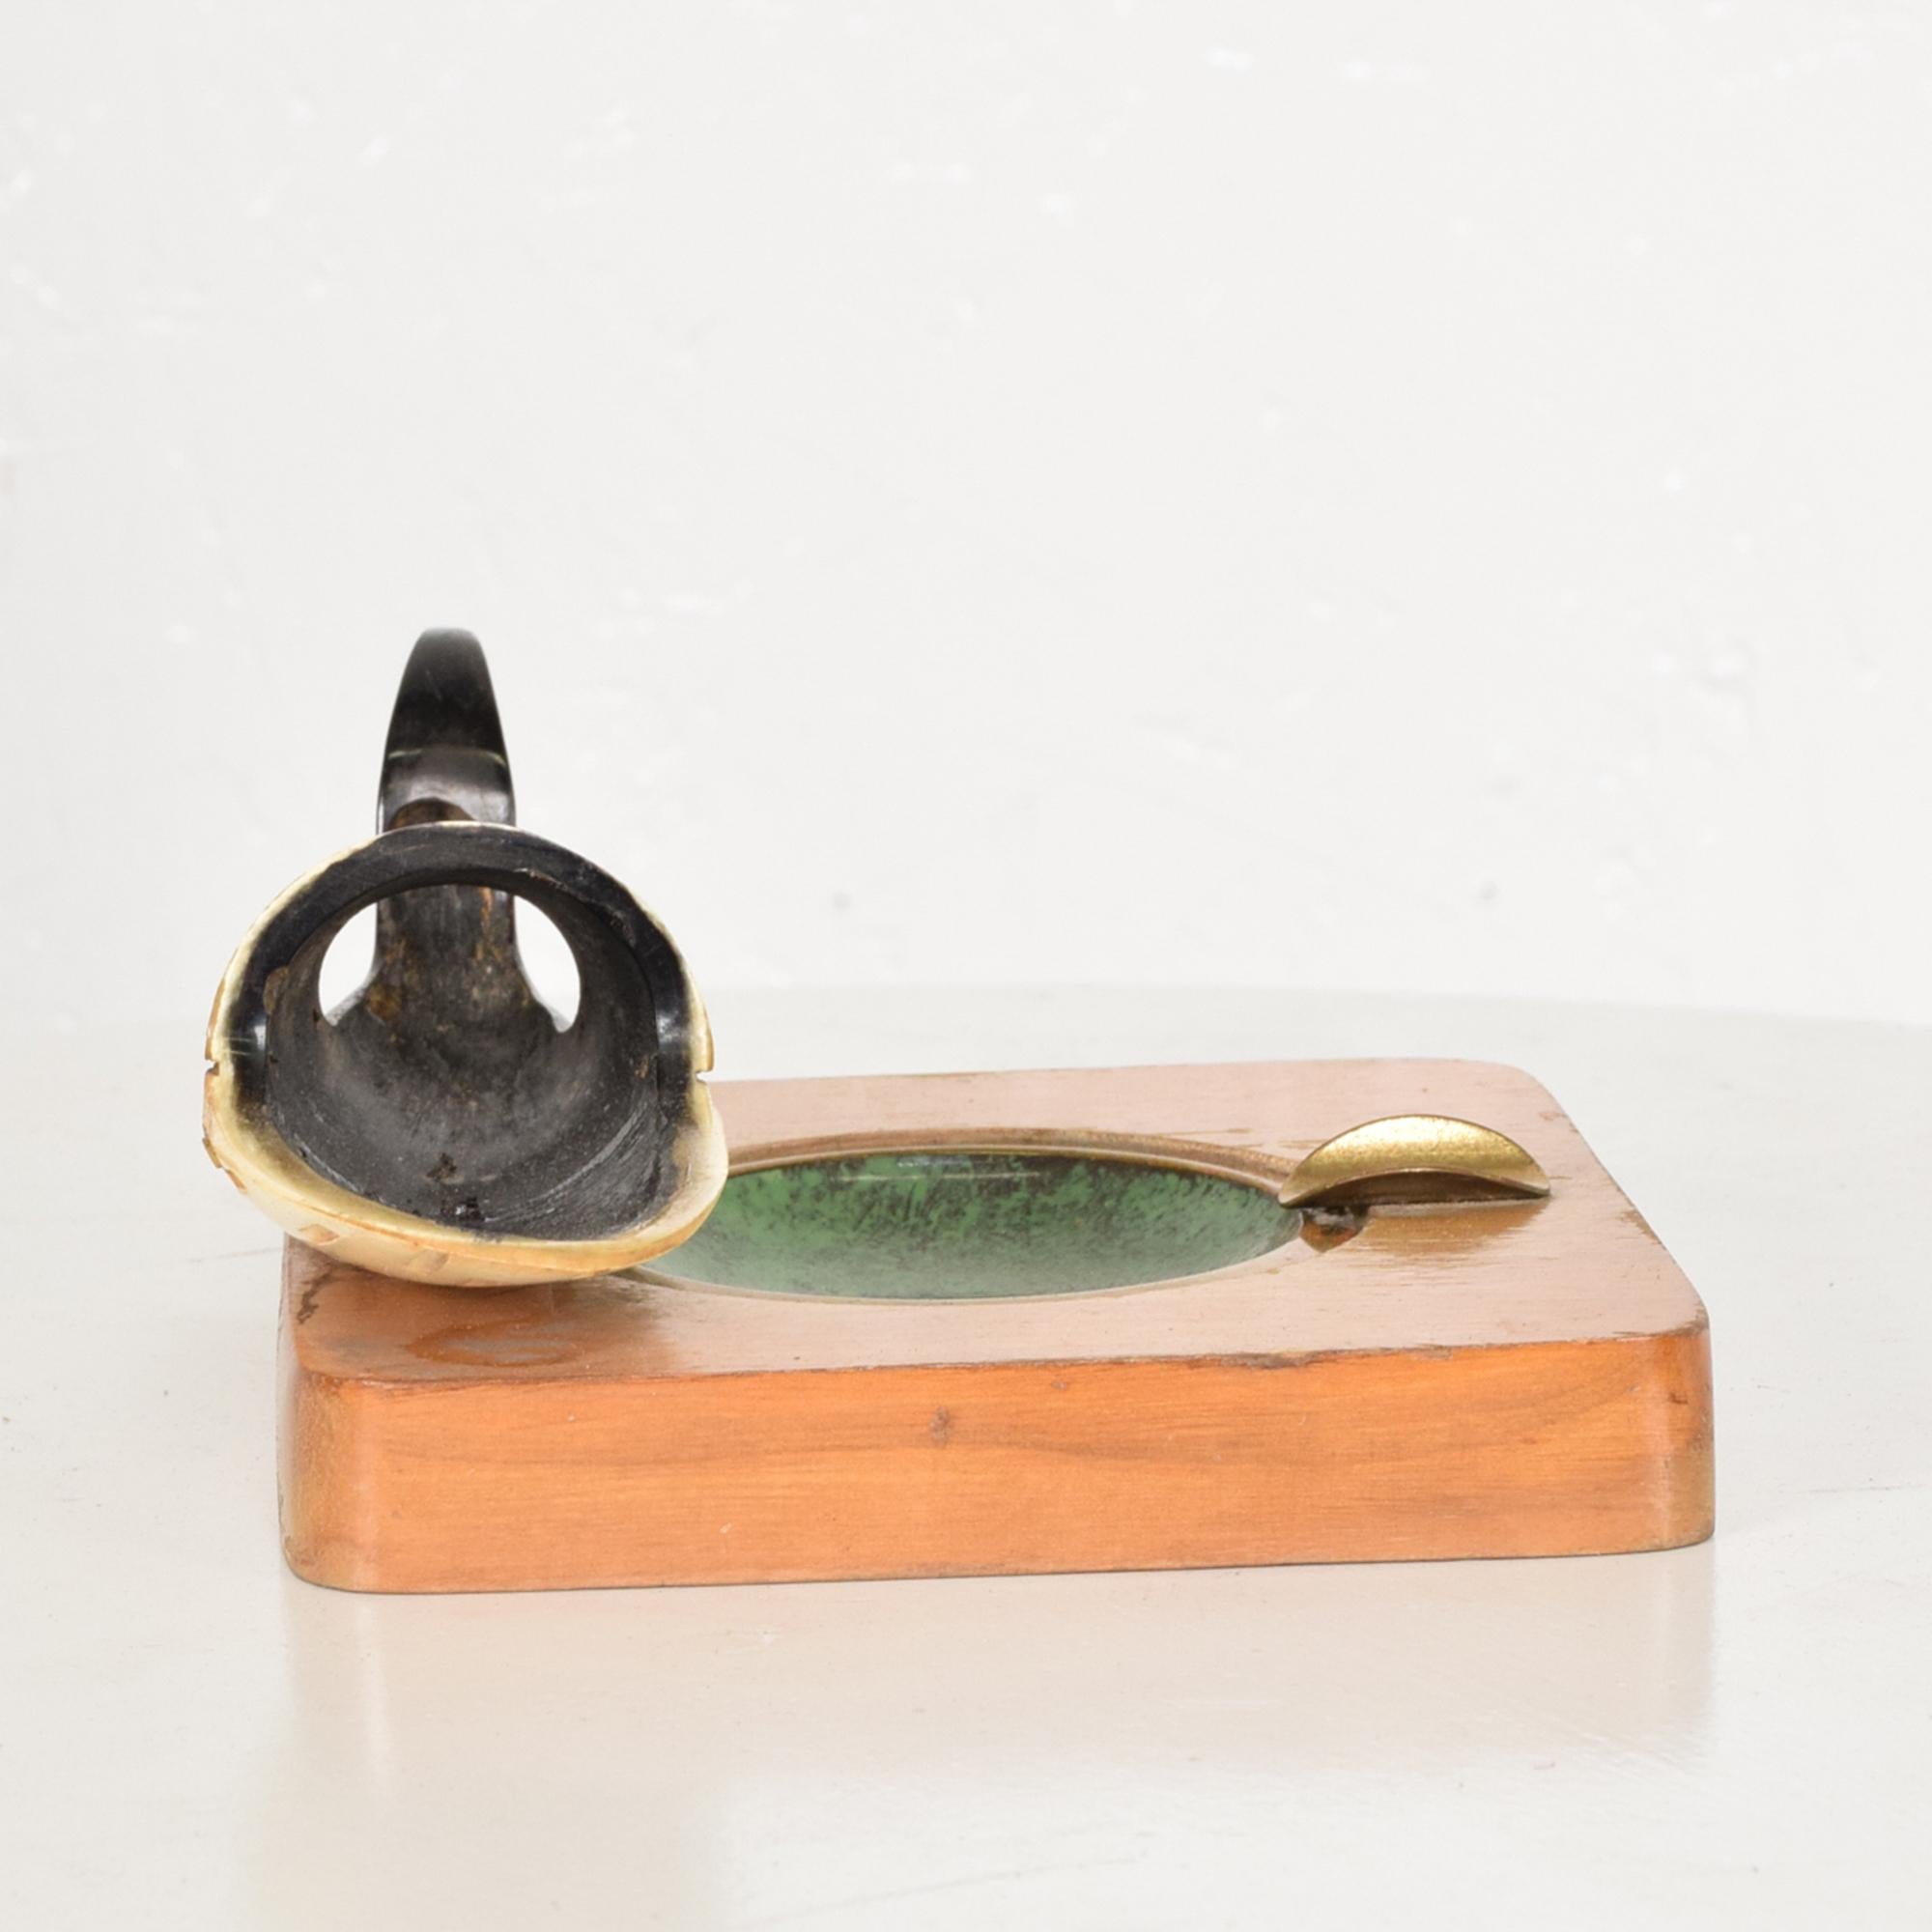 Fabulous style Mid-Century Modern horn pipe holder stand with ashtray in brass
Attributed to Richard Rohac, Austria, 1950s. Unsigned.
Crafted in horn, wood and brass.
Original condition vintage piece. Please see our images.
Measures: 5 D x 7 W x